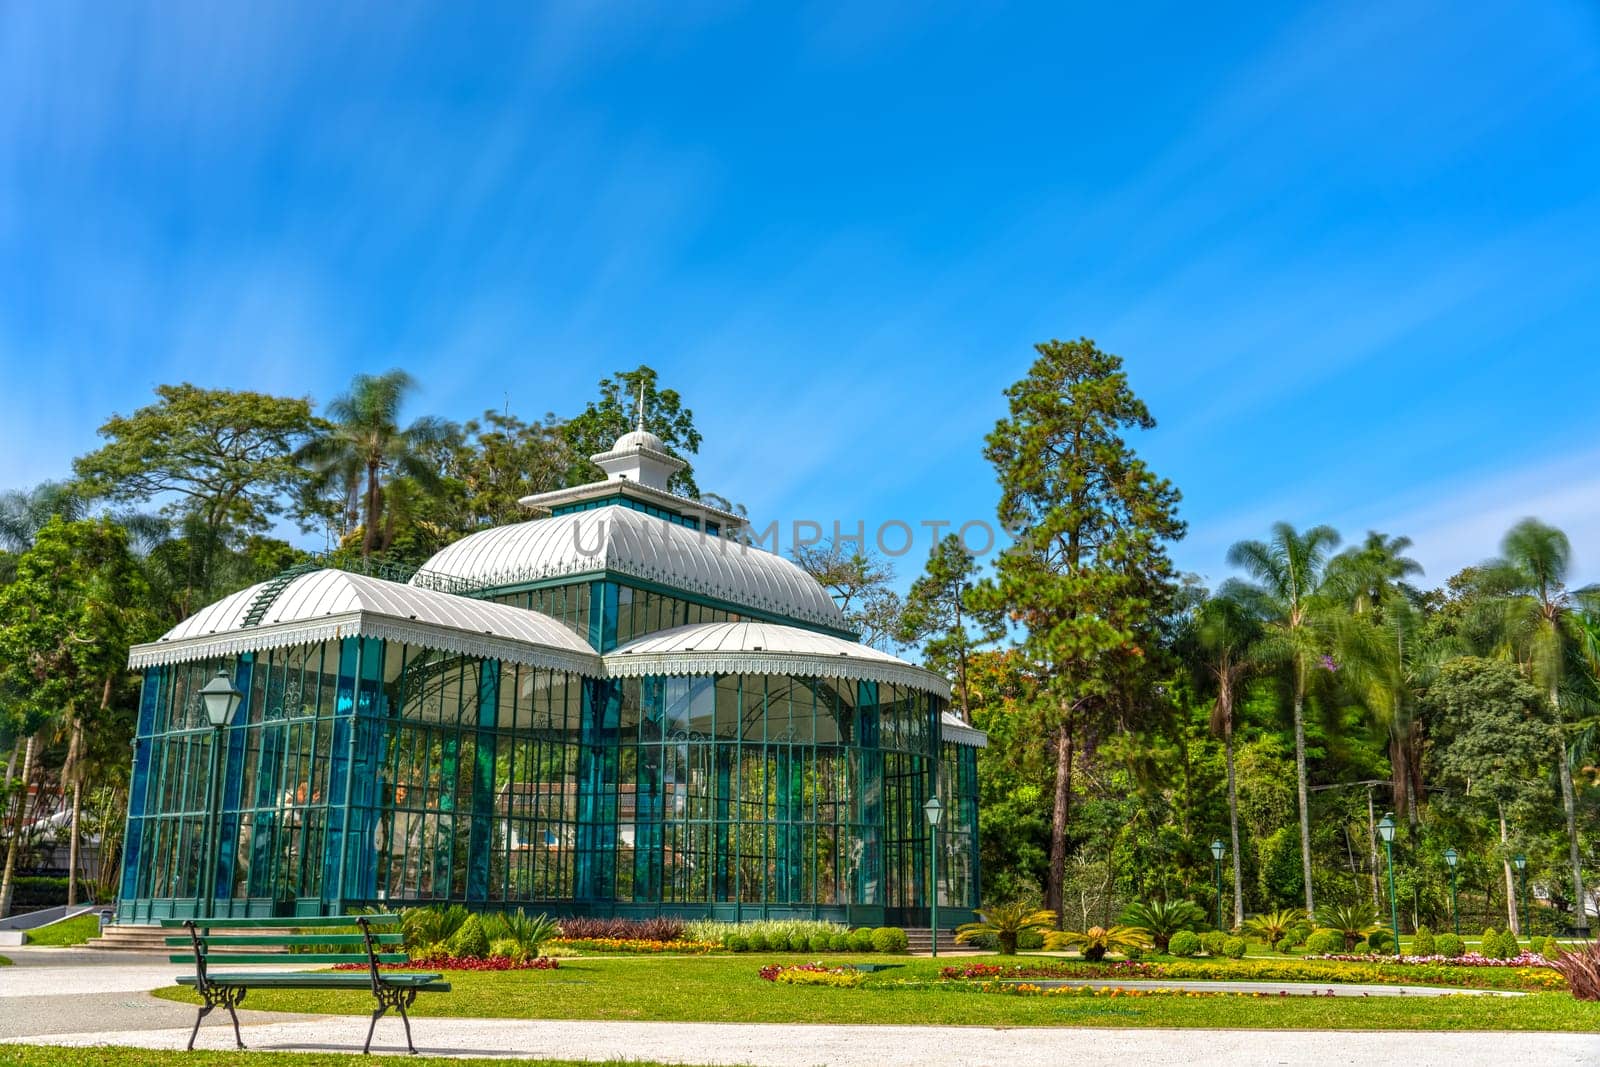 An impressive long exposure shot of the Crystal Palace in Petropolis, a beautiful glass palace surrounded by trees and blue skies, perfect for your next nature-themed project.